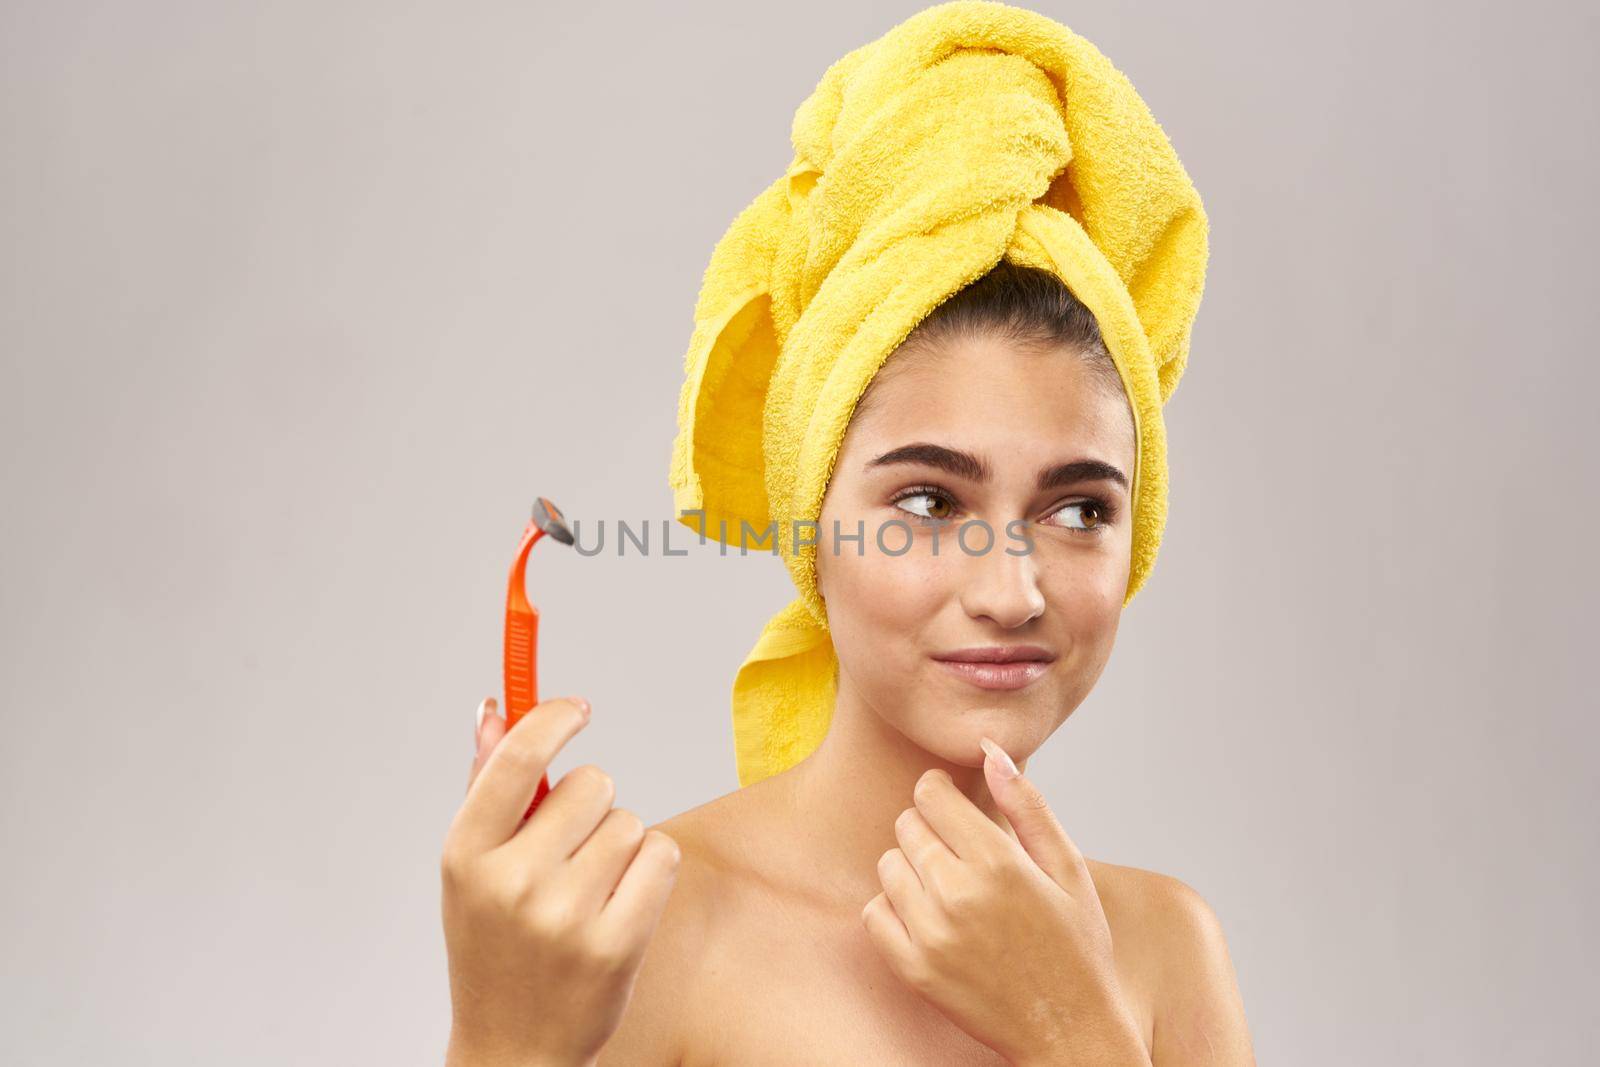 beautiful woman with a yellow towel on his head shaving. High quality photo